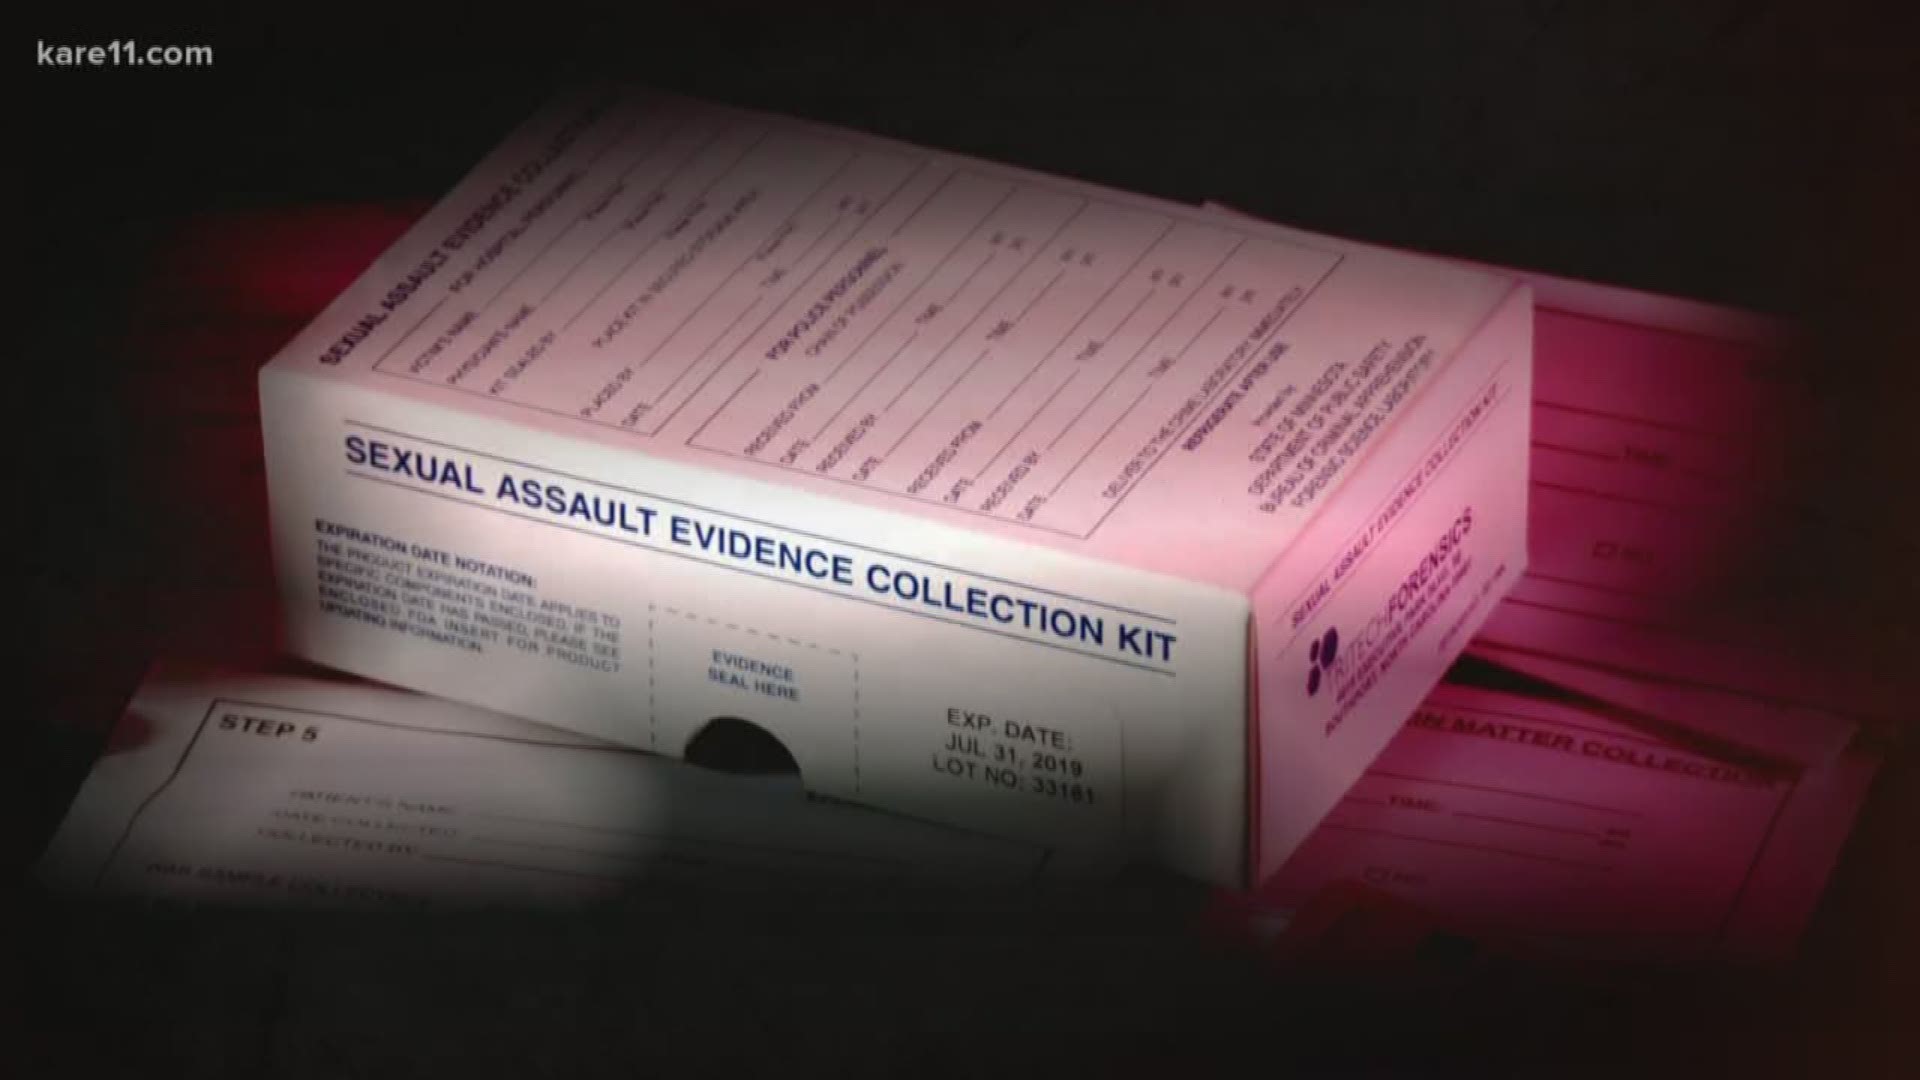 Lawmakers on Tuesday unveiled what they called sweeping, bipartisan legislation that would require police to test all unrestricted rape kits.